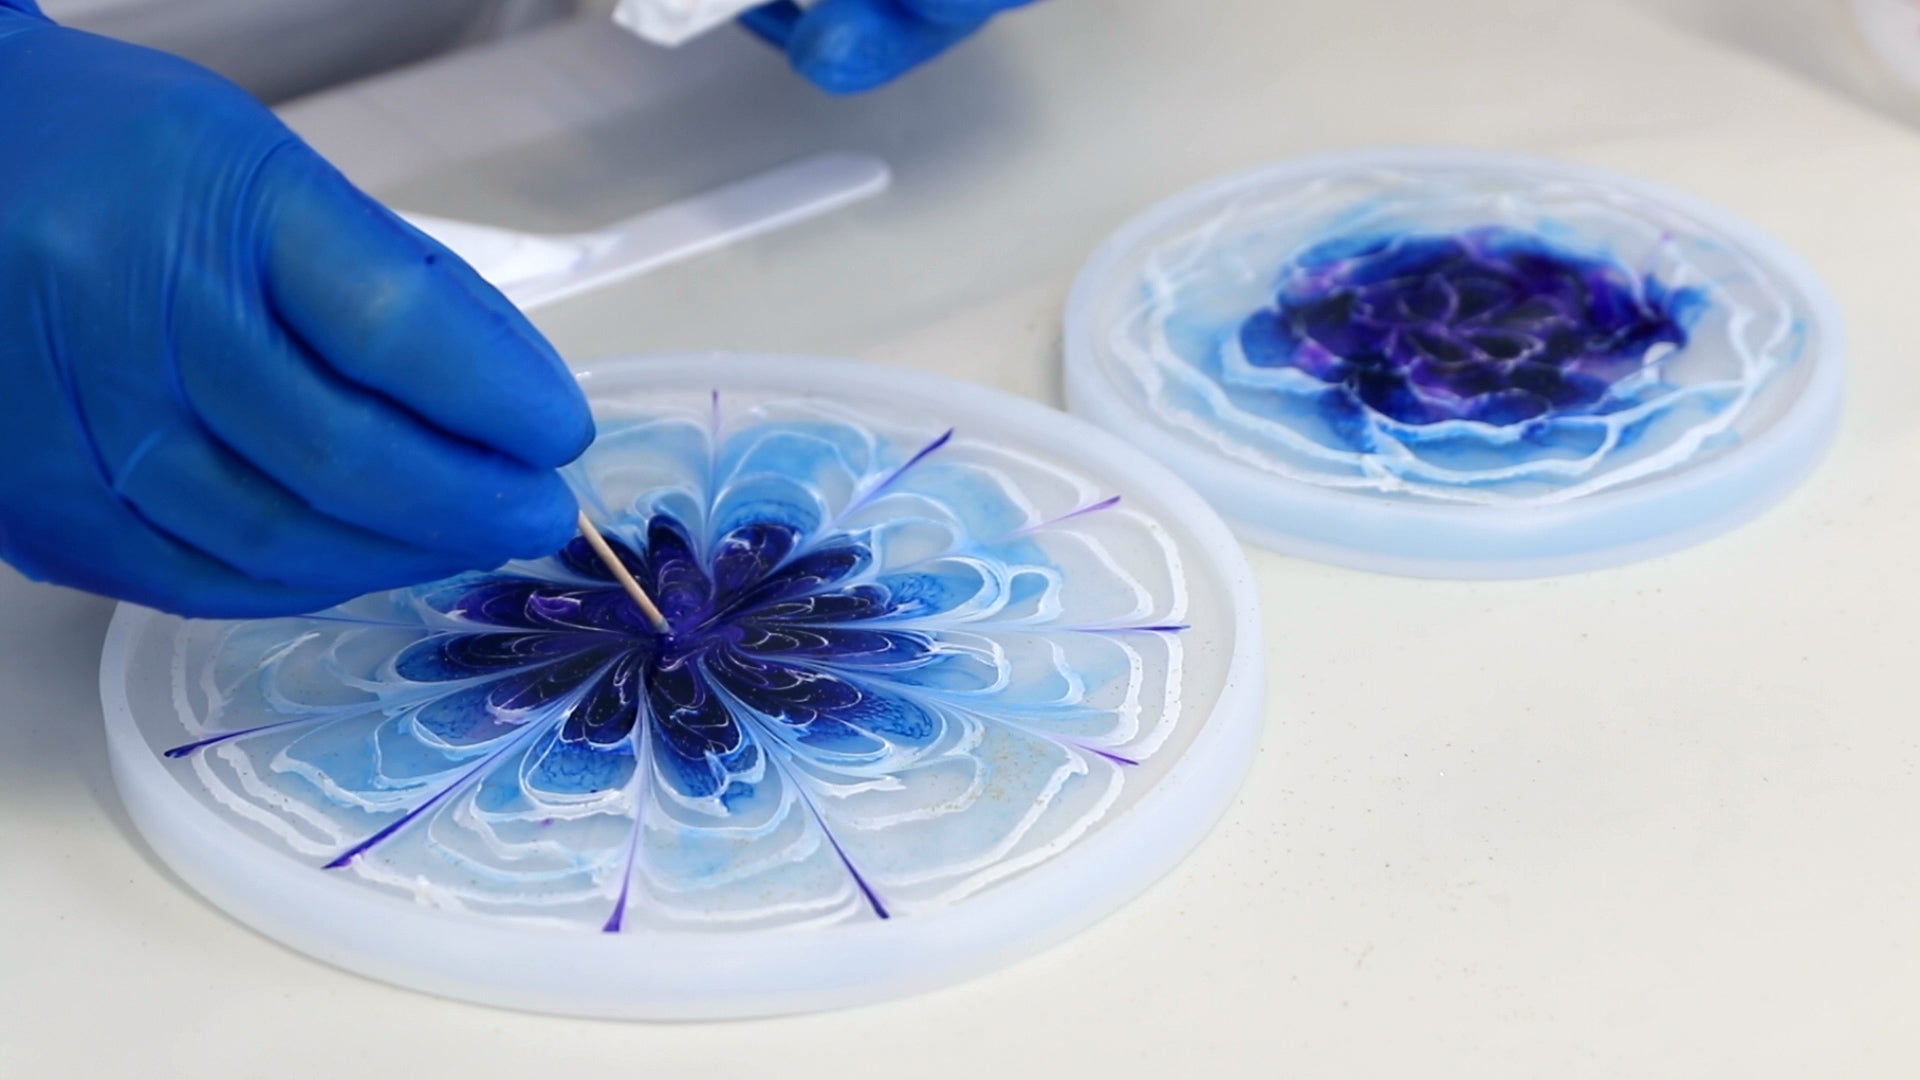 drag toothpick to make even lines throughout resin coaster to shape 3D flower petals